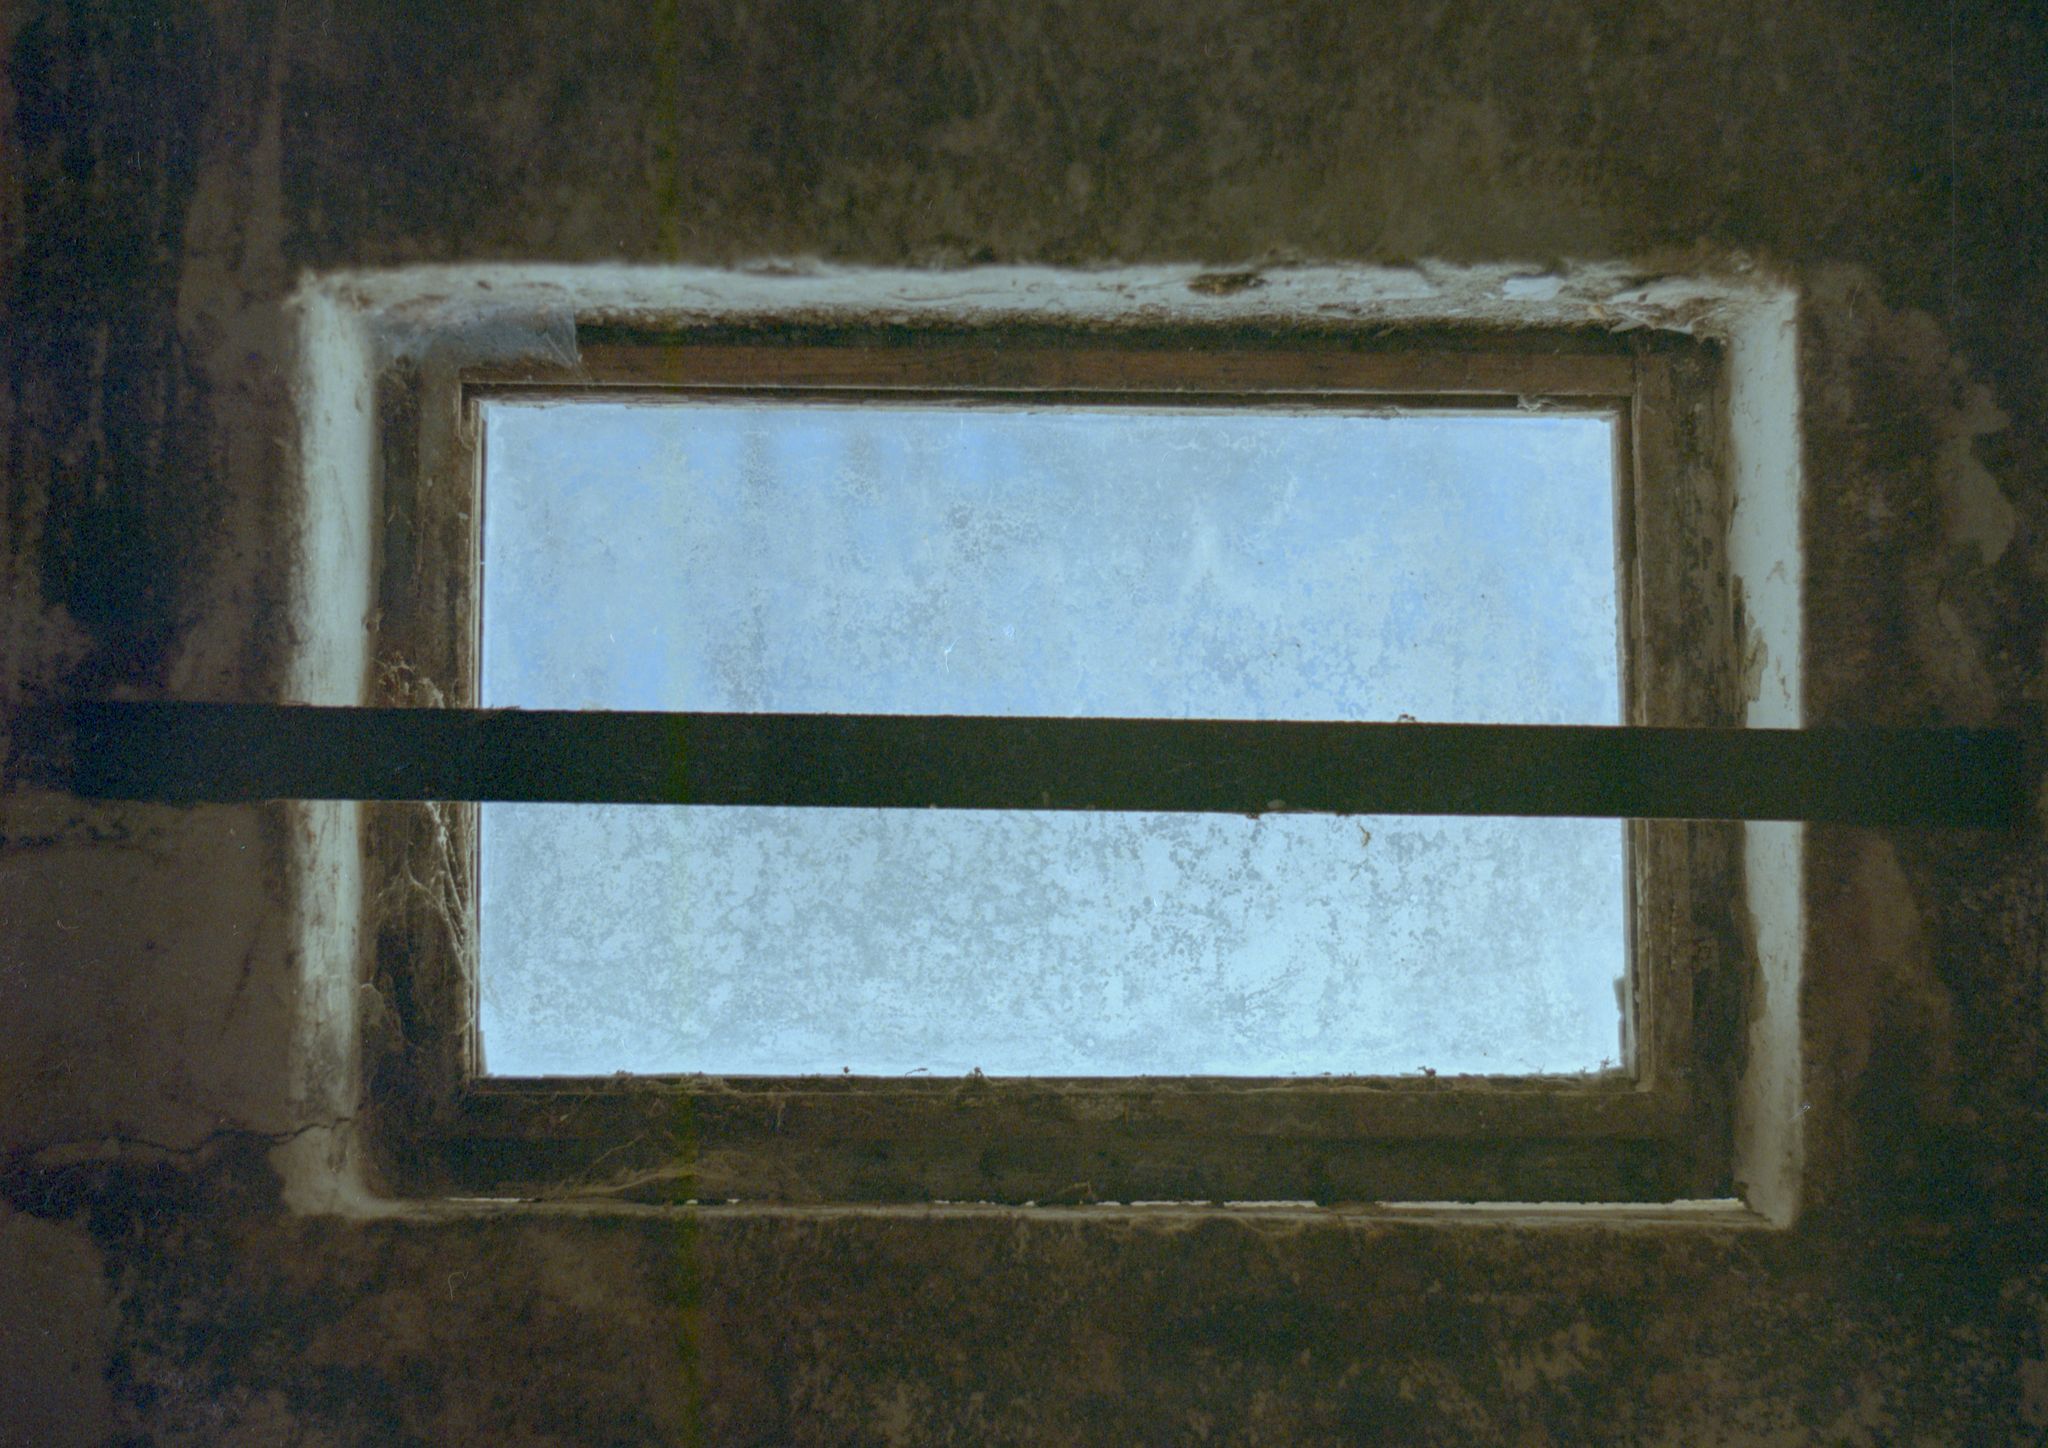 A window in a ruined collective farm with hangings